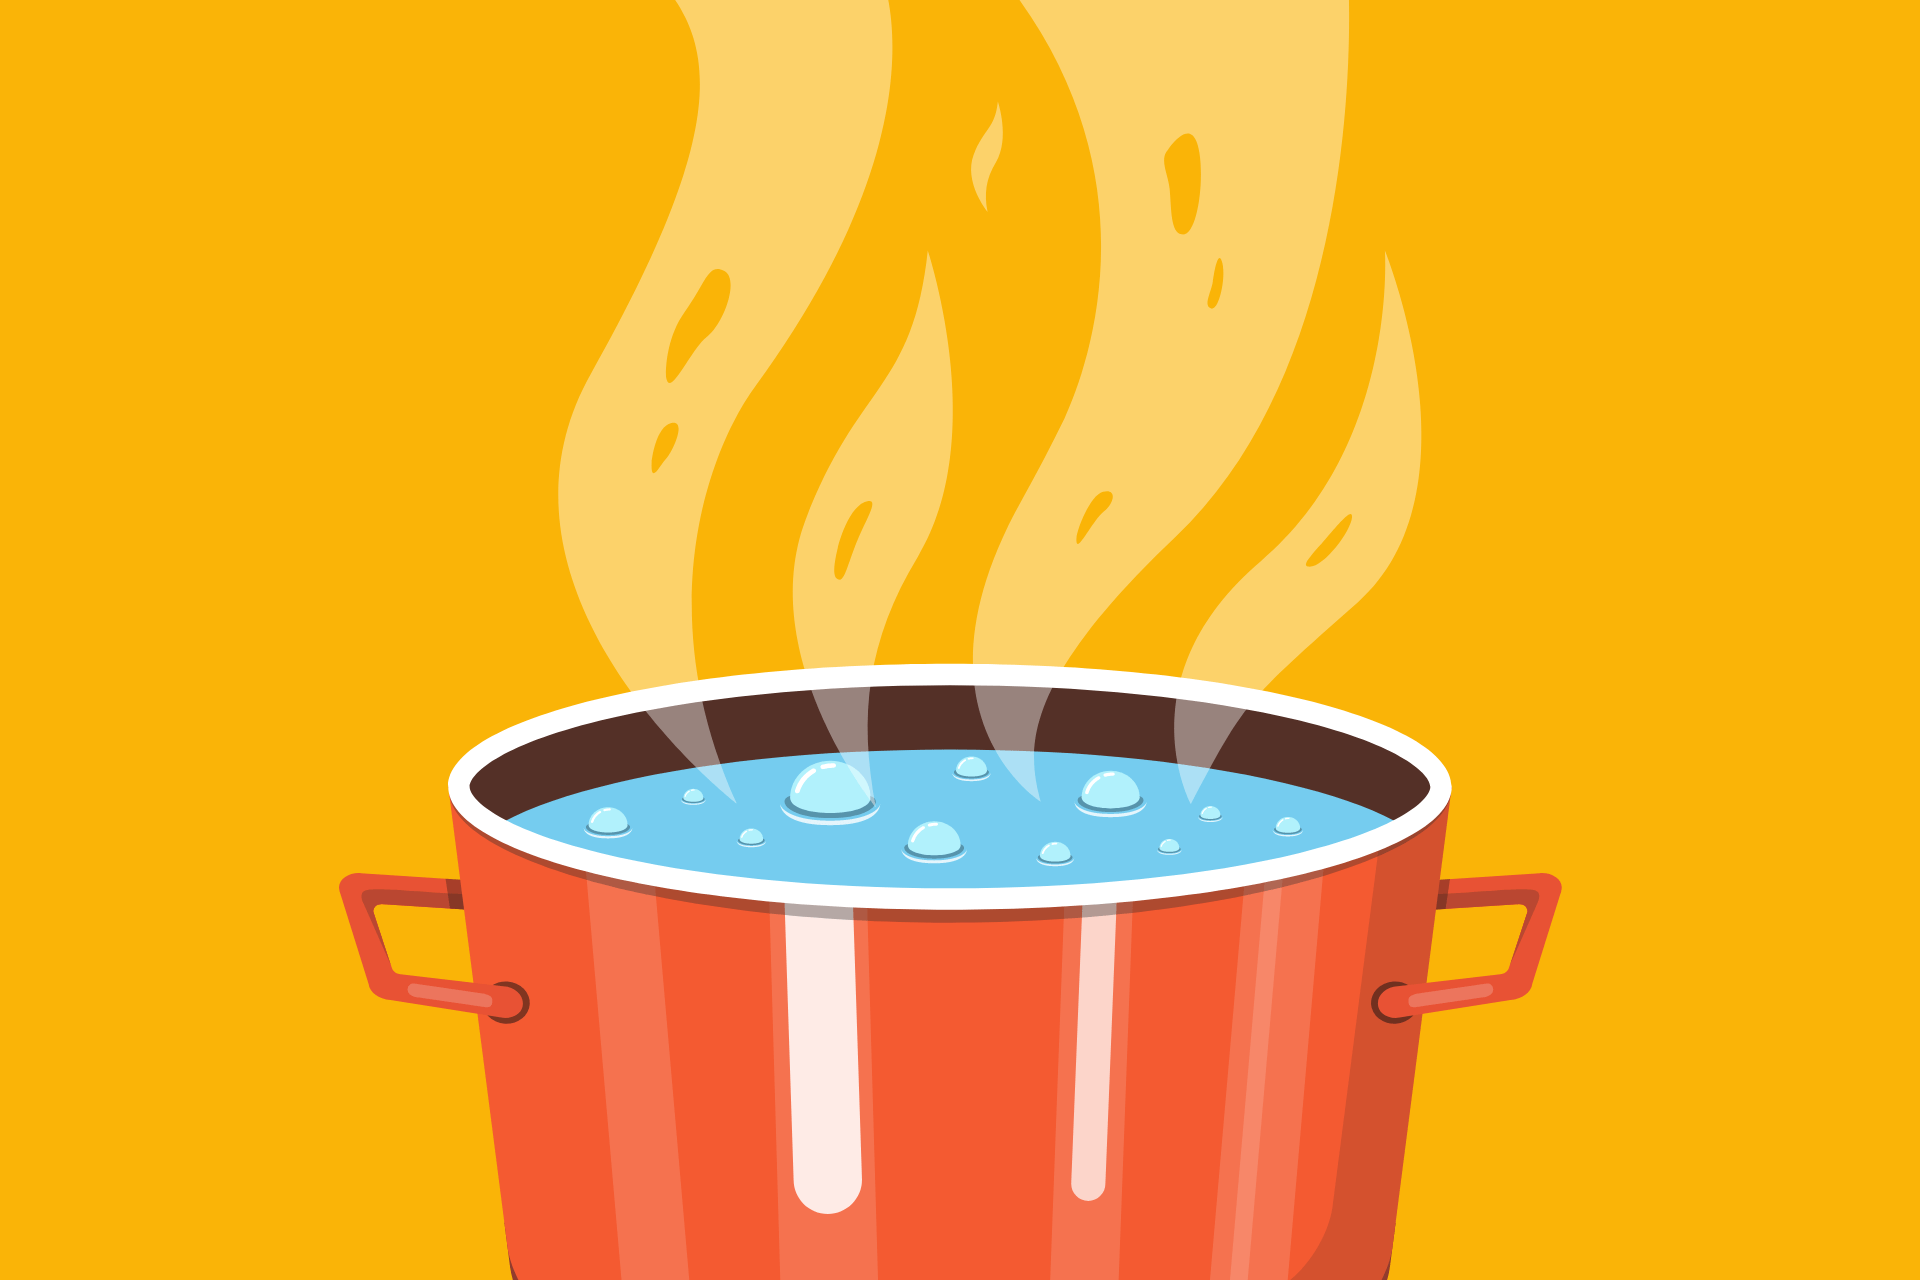 Does Cold Water Boil Faster Than Warm Water From the Tap?